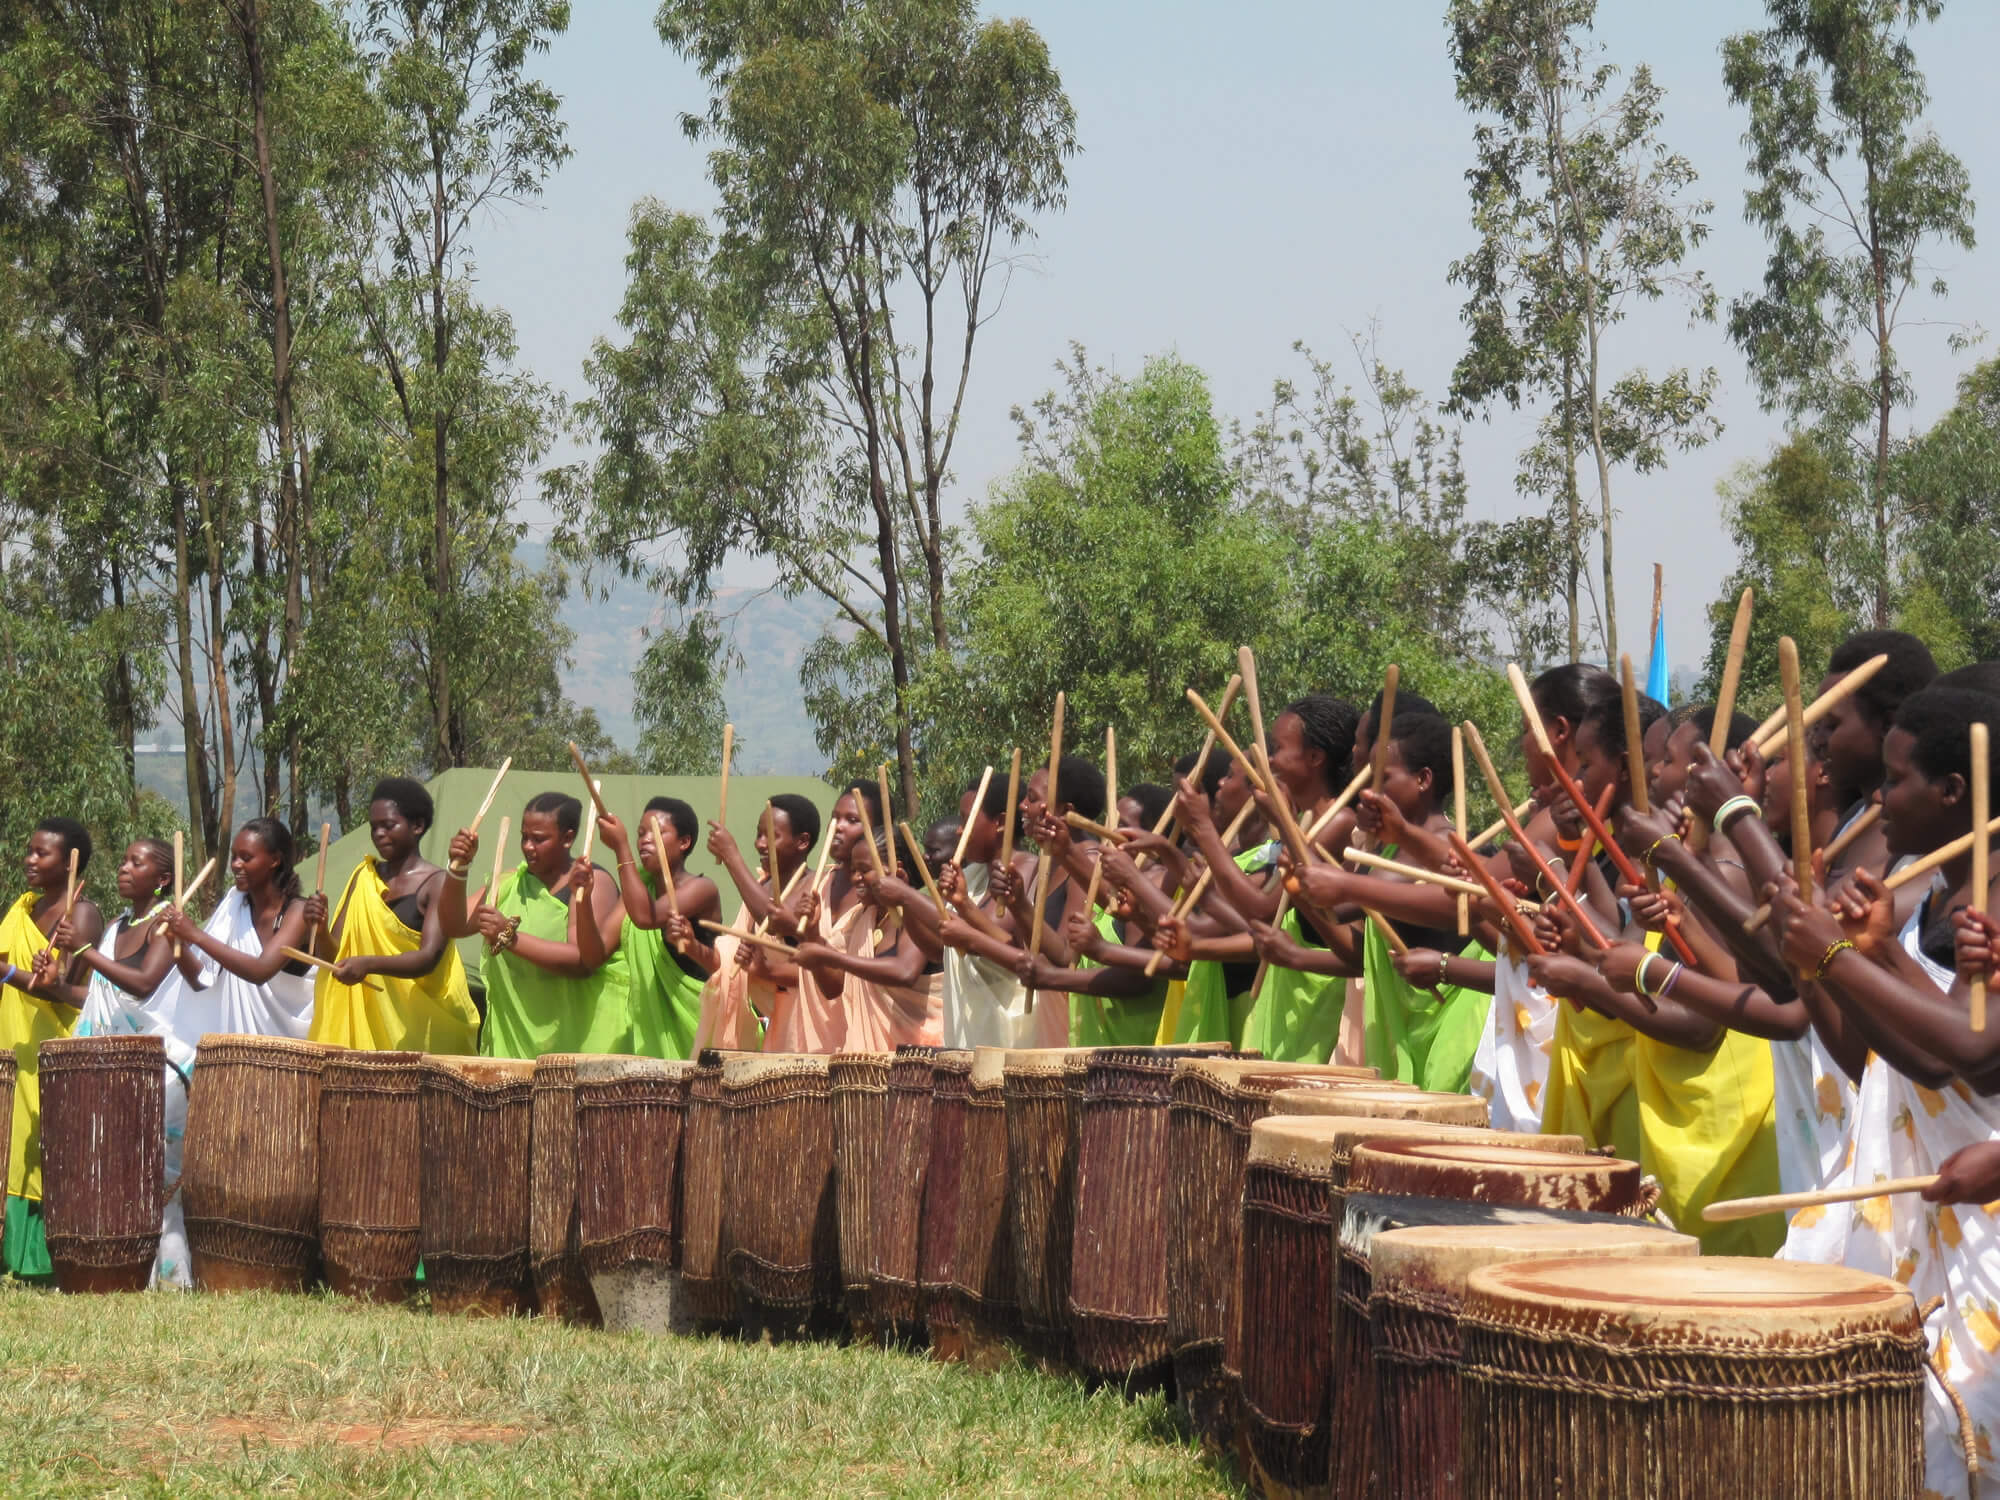 A still from Sweet Dreams. A line of women stand in the middle of a field, each in front of a waist-high drum. They are holding drumsticks and their arms are raised above their heads, mid strike. They all wear one shoulder wraps in various shades of greens, pinks, and whites.